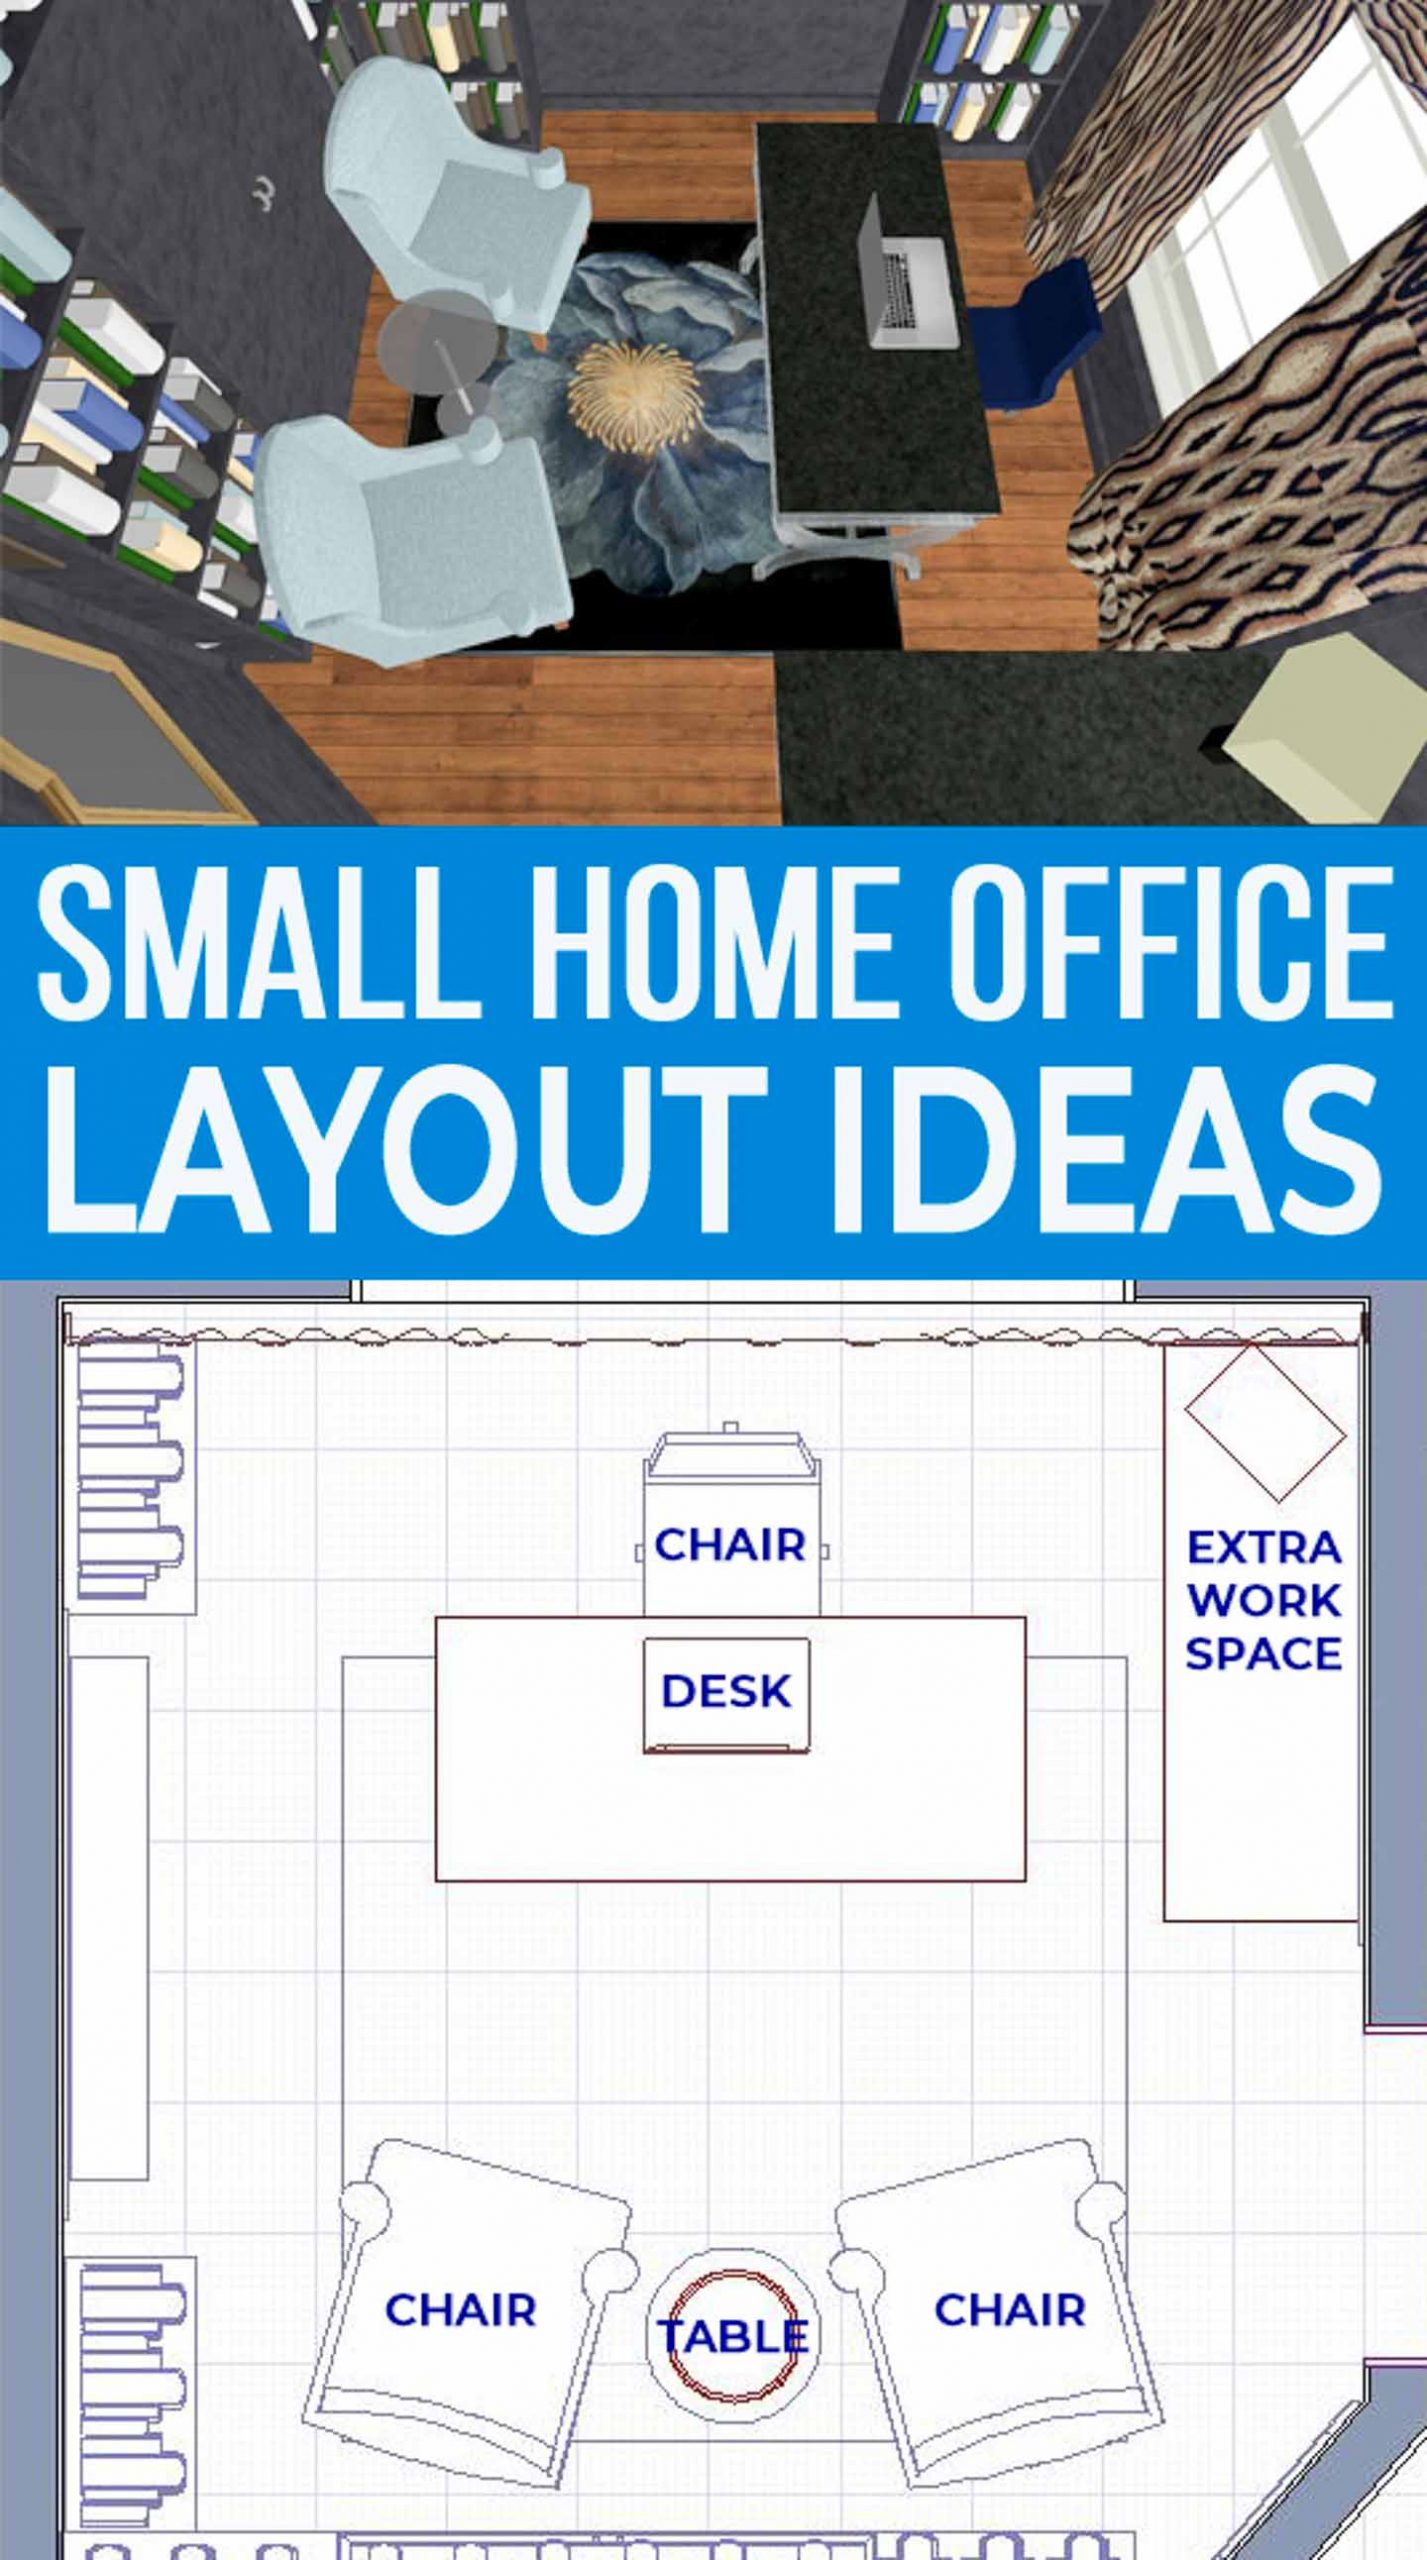 8 small home office layout ideas (in a 10' x 10' room)